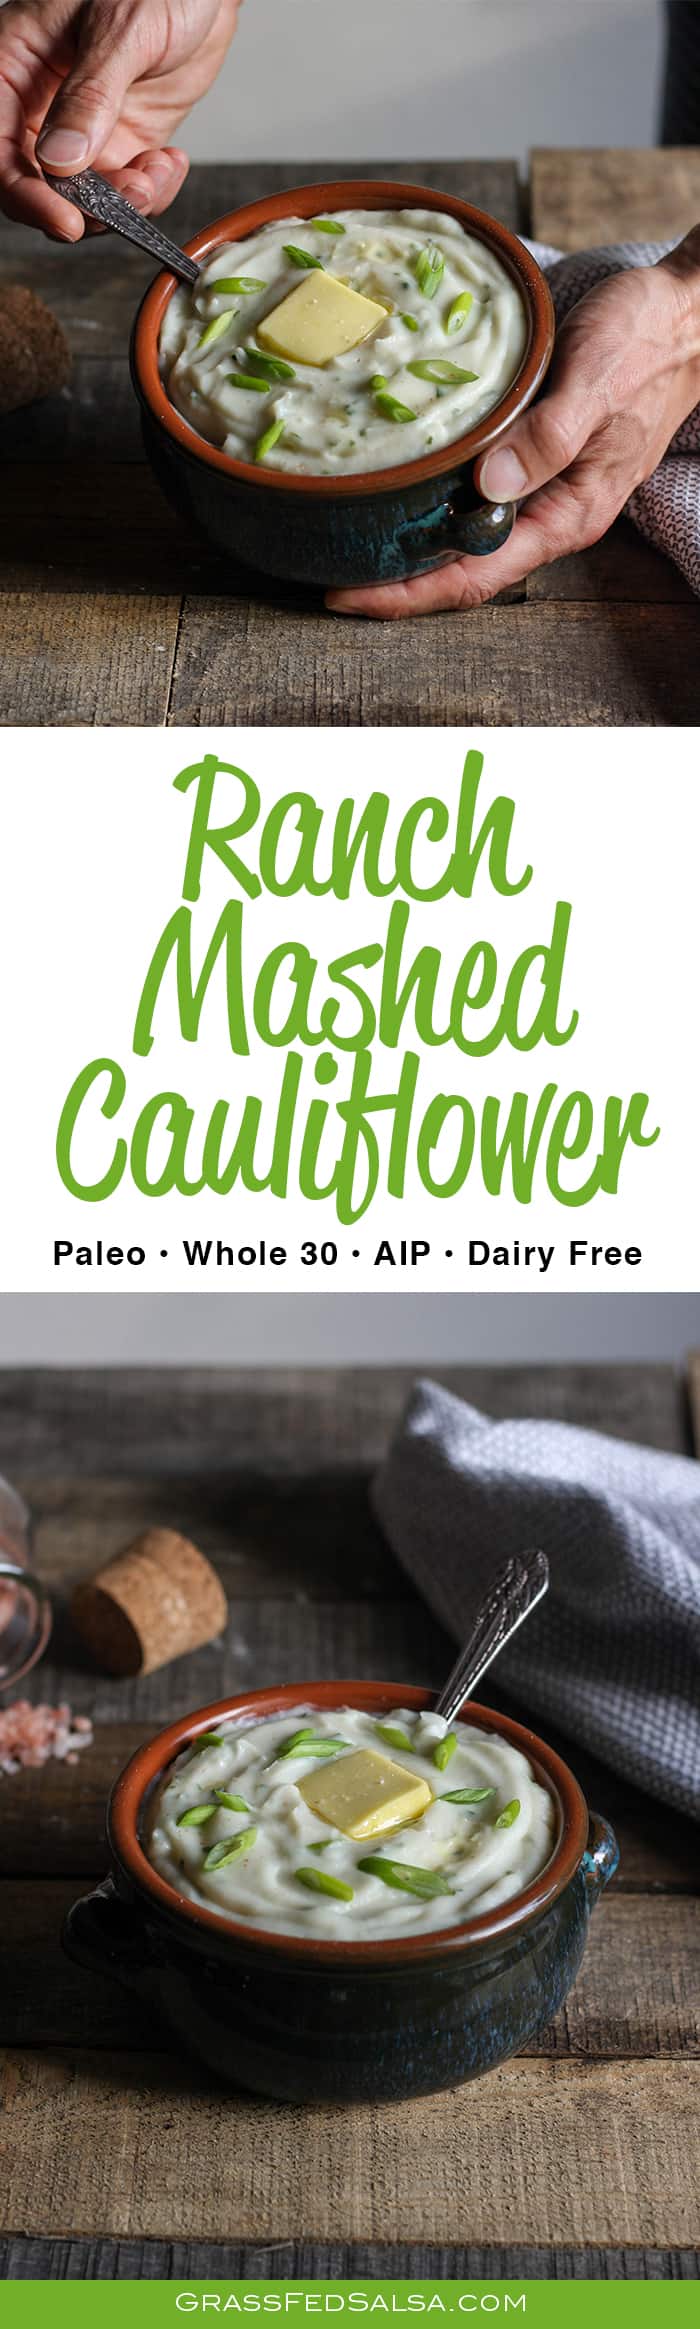 Paleo, AIP, and Whole 30 friendly Ranch Mashed Cauliflower! A low carb version of mashed potatoes, full of ranch flavor. This Ranch Mashed Cauliflower has a thick and creamy texture, and a light buttery and cheesy taste. Dairy free, Whole 30, AIP and paleo friendly! Simple to make in 15 minutes.